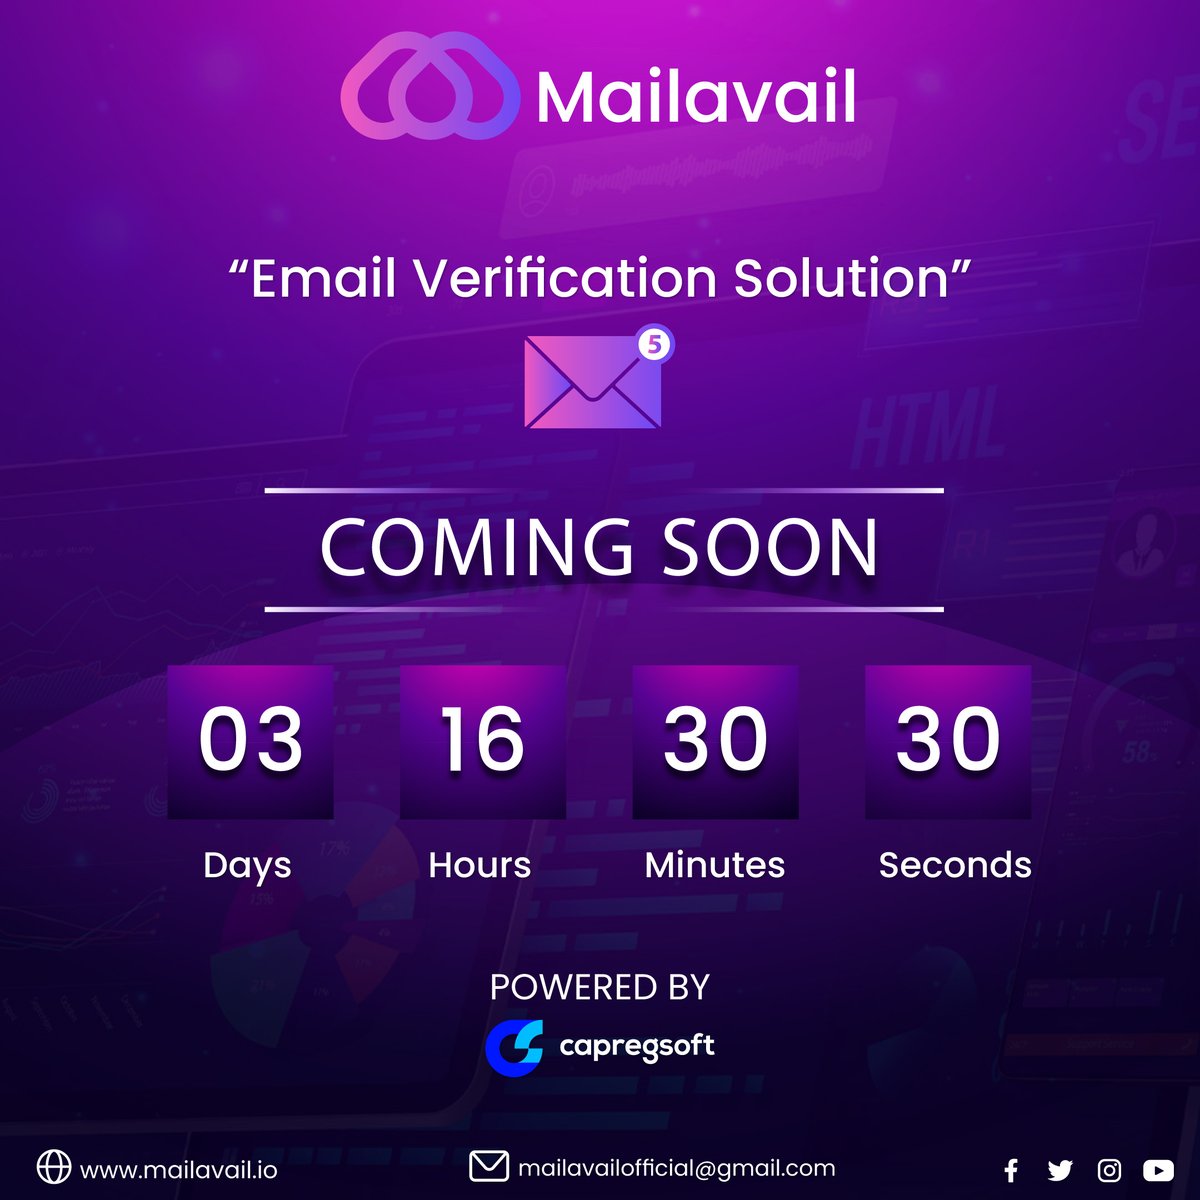 The upcoming launch of Mailavail, a state-of-the-art email verification software designed to revolutionize your email marketing campaigns. With its advanced algorithms #emailverification #mailavail  #Email #marketingtool #softwaredevelopment #capregsoftteam #commingsoon.